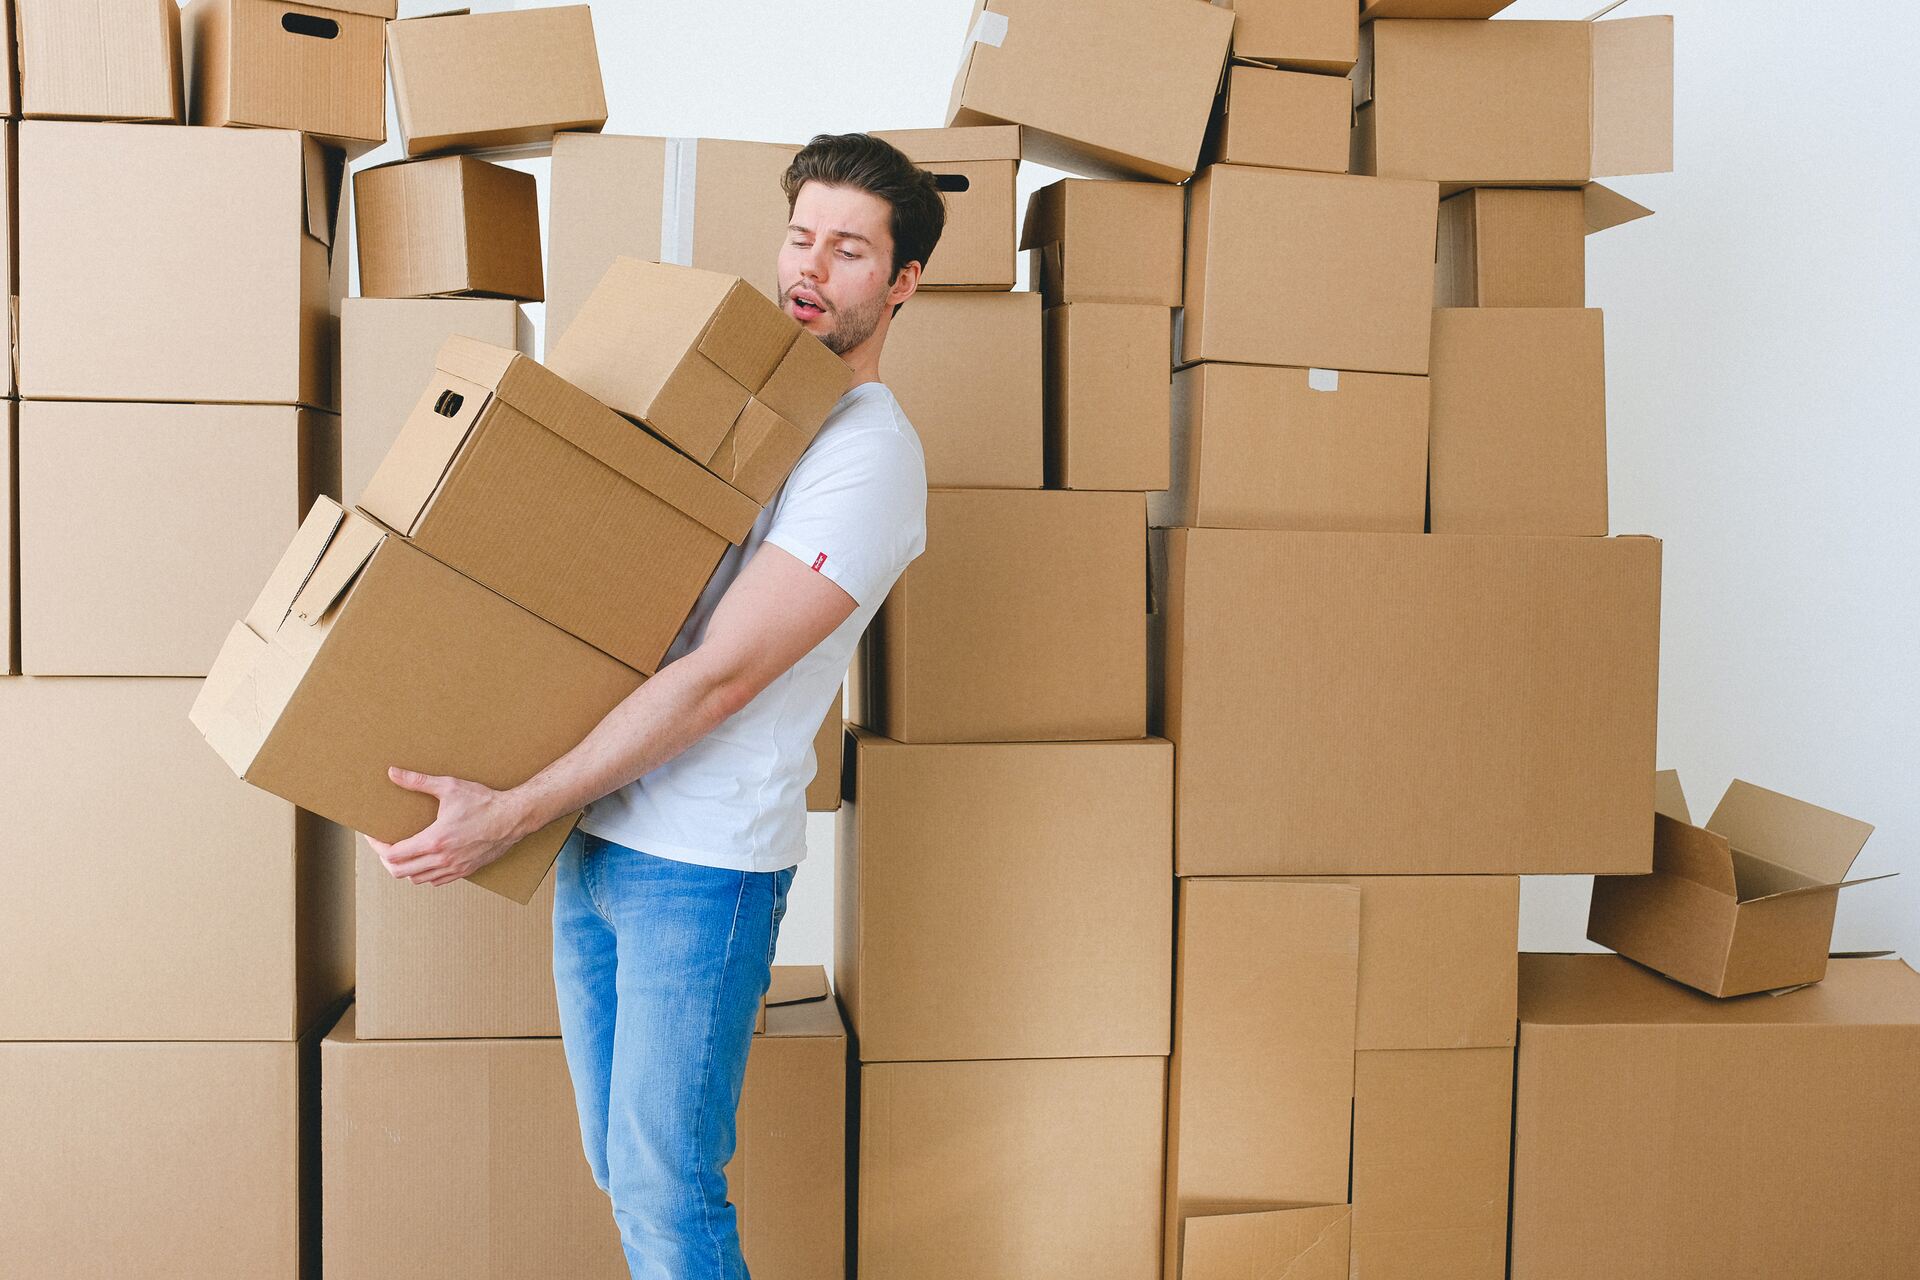 Man struggling to carry too many cardboard boxes